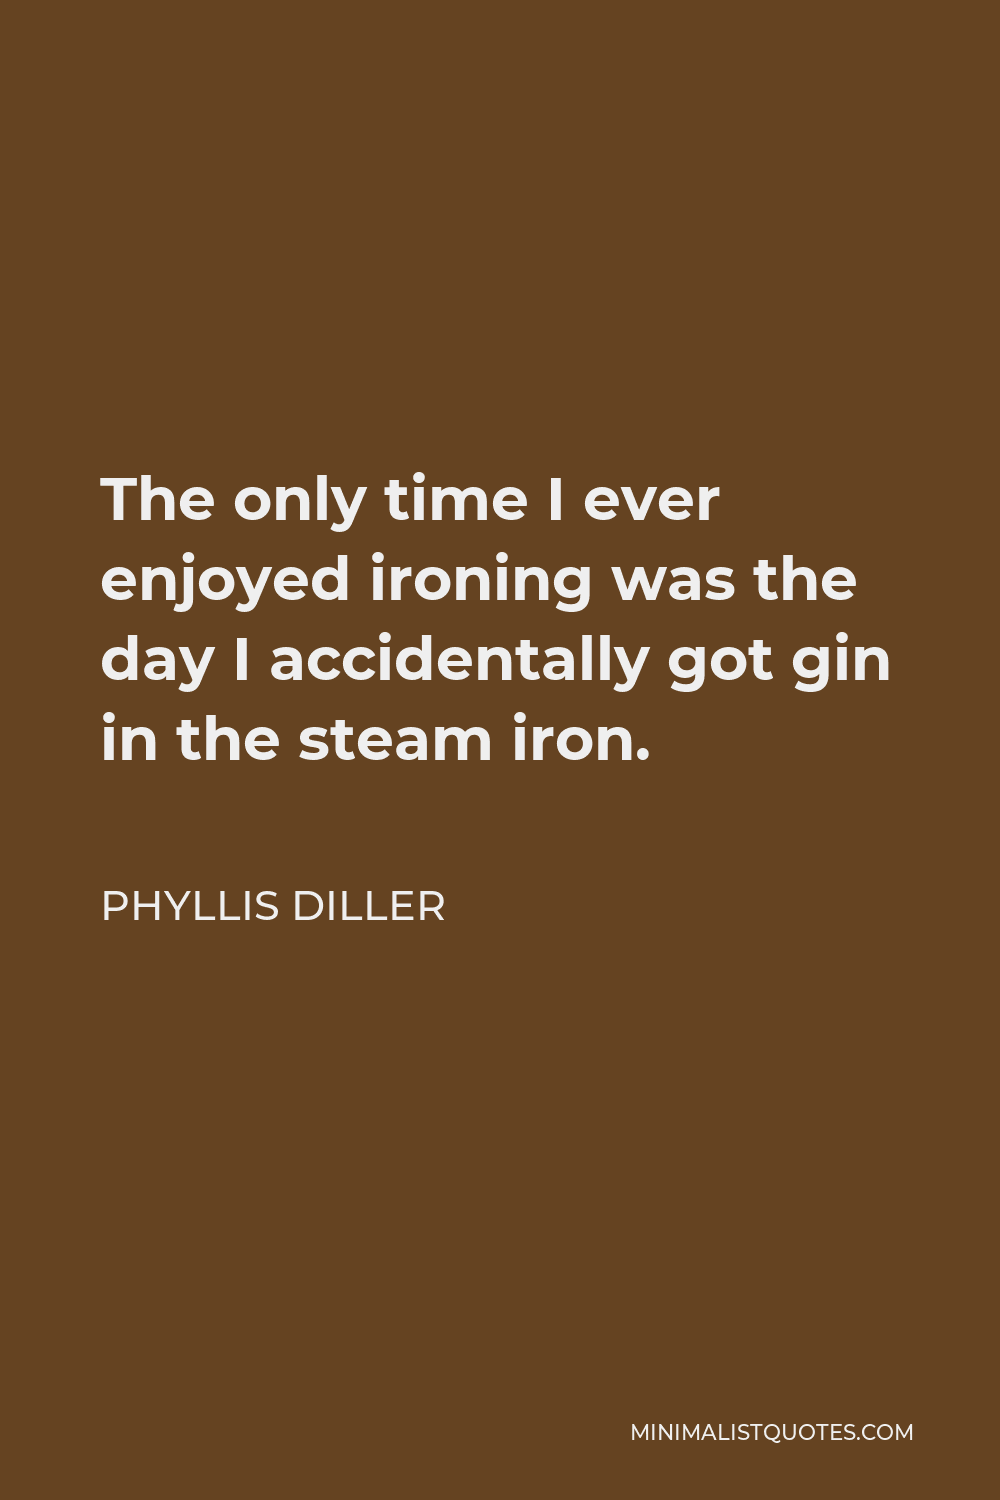 Phyllis Diller Quote - The only time I ever enjoyed ironing was the day I accidentally got gin in the steam iron.